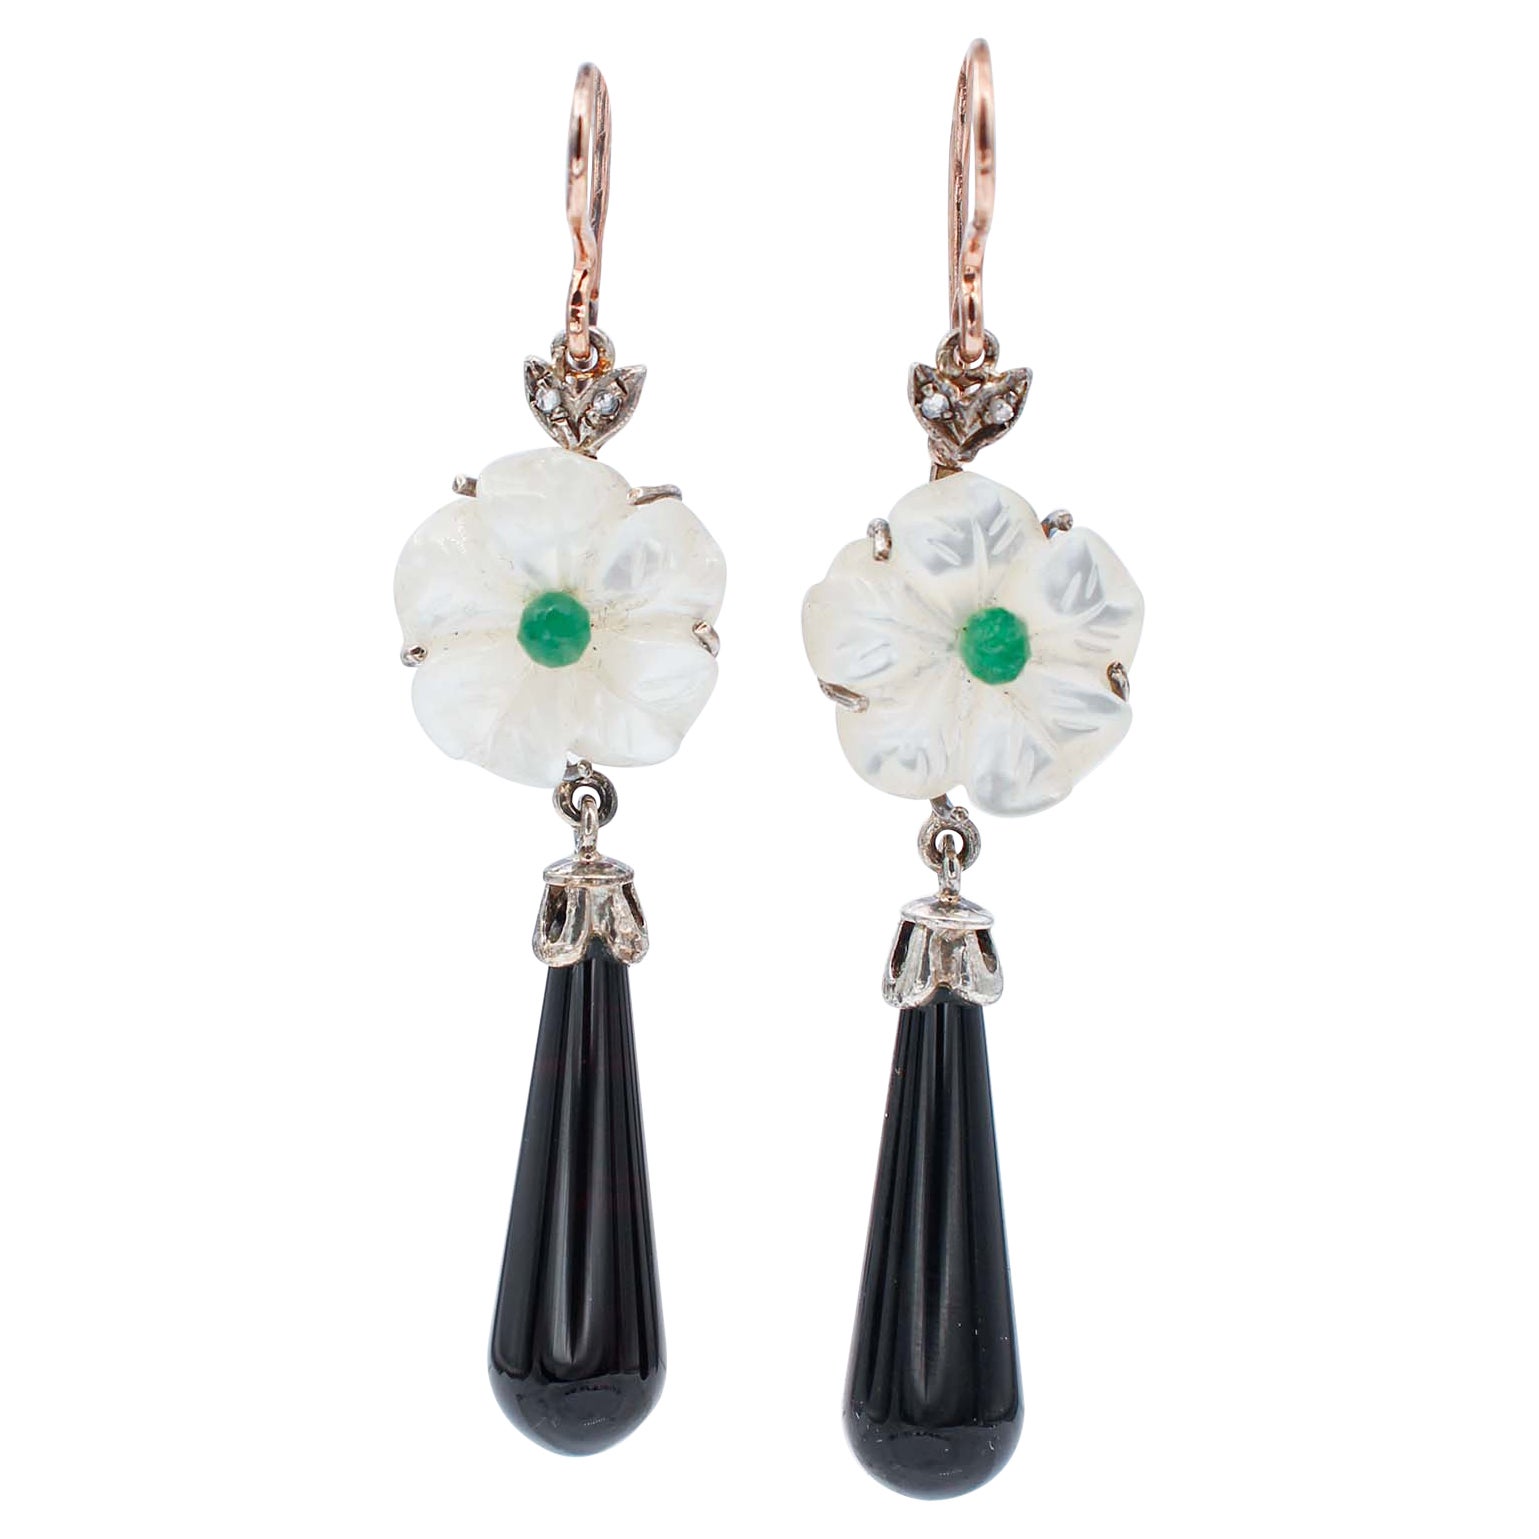 Emeralds, Diamonds, White Stones, Onyx, 9 Kt Rose Gold and Silver Dangle Earrings